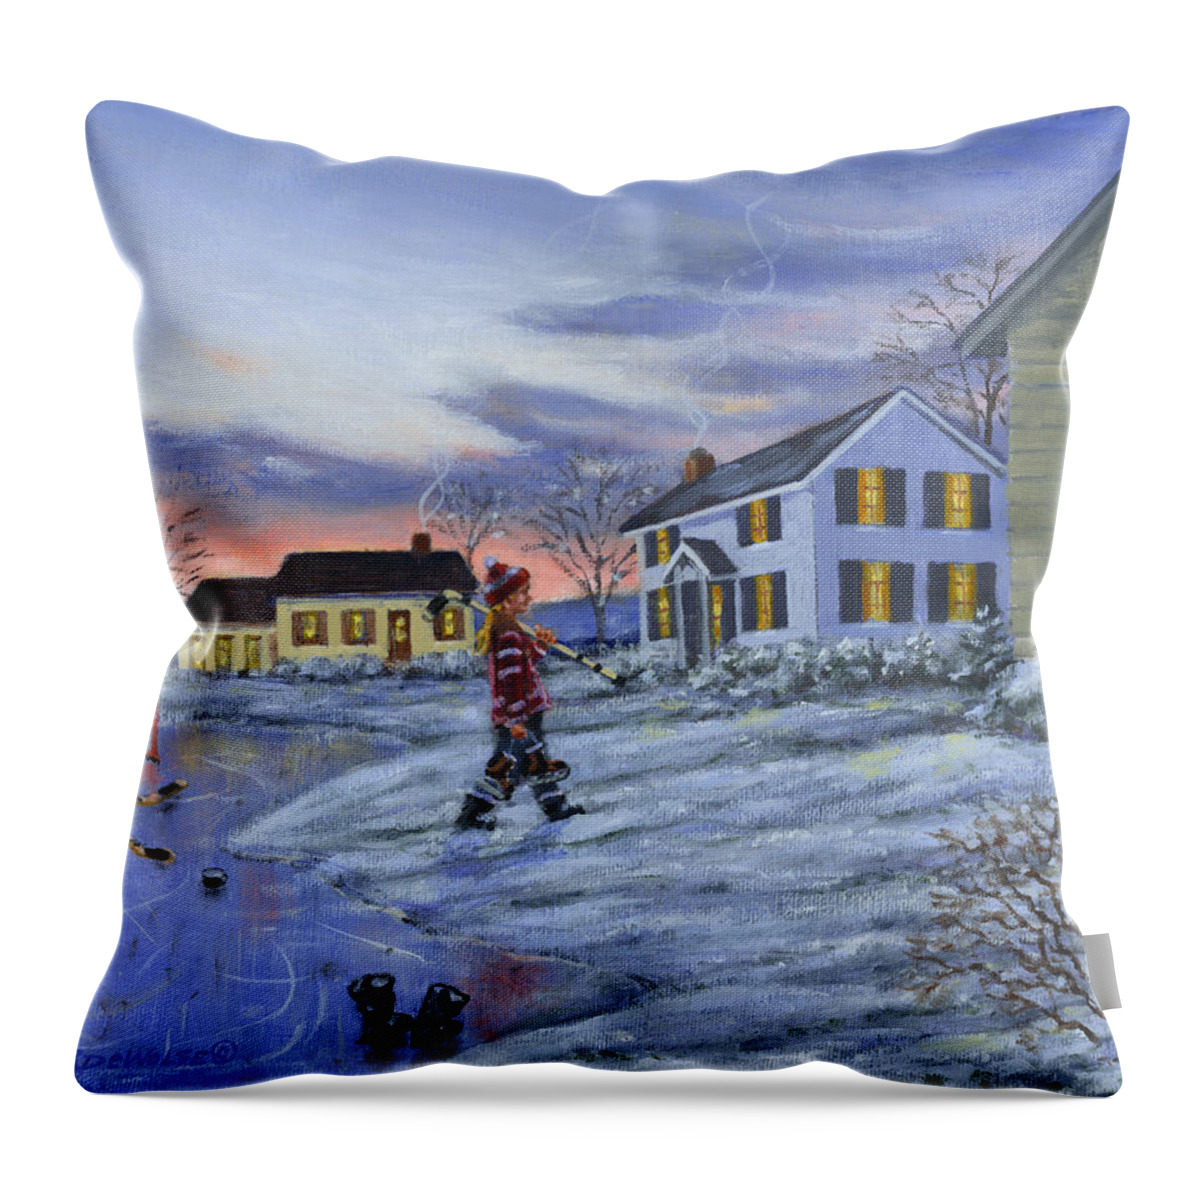 Girl Throw Pillow featuring the painting Hockey Girl by Richard De Wolfe